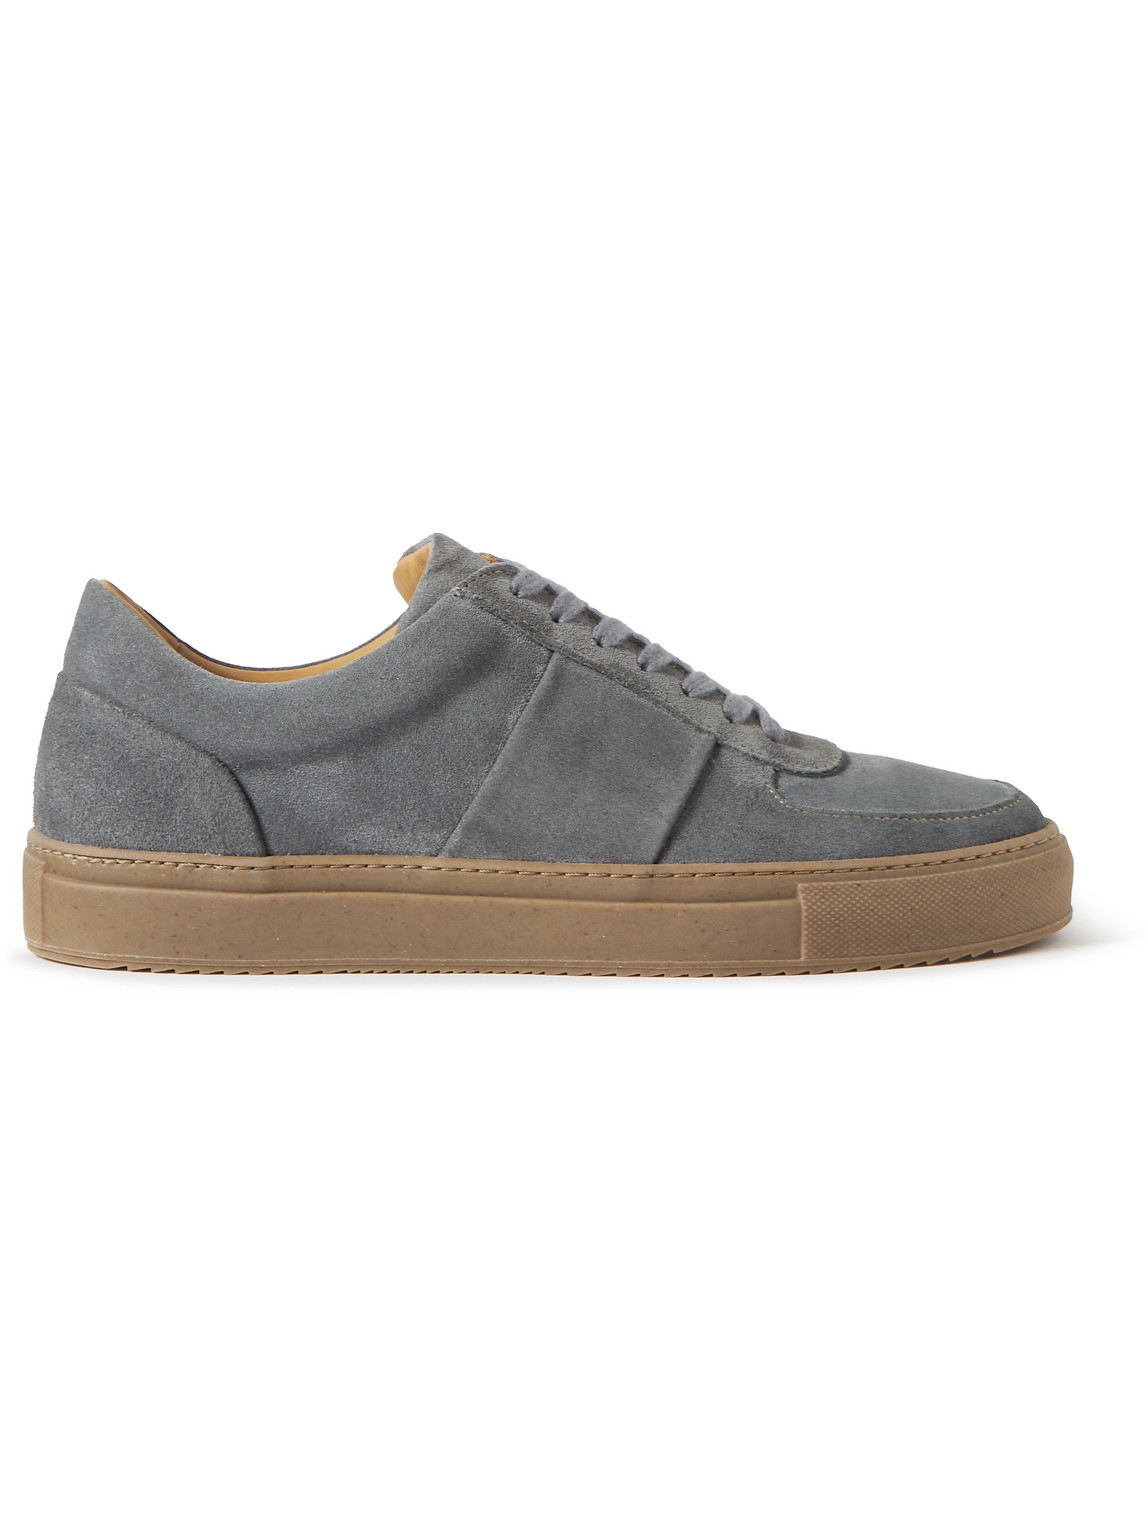 Mr P Larry Regenerated Suede By Evolo® Trainers In Grey